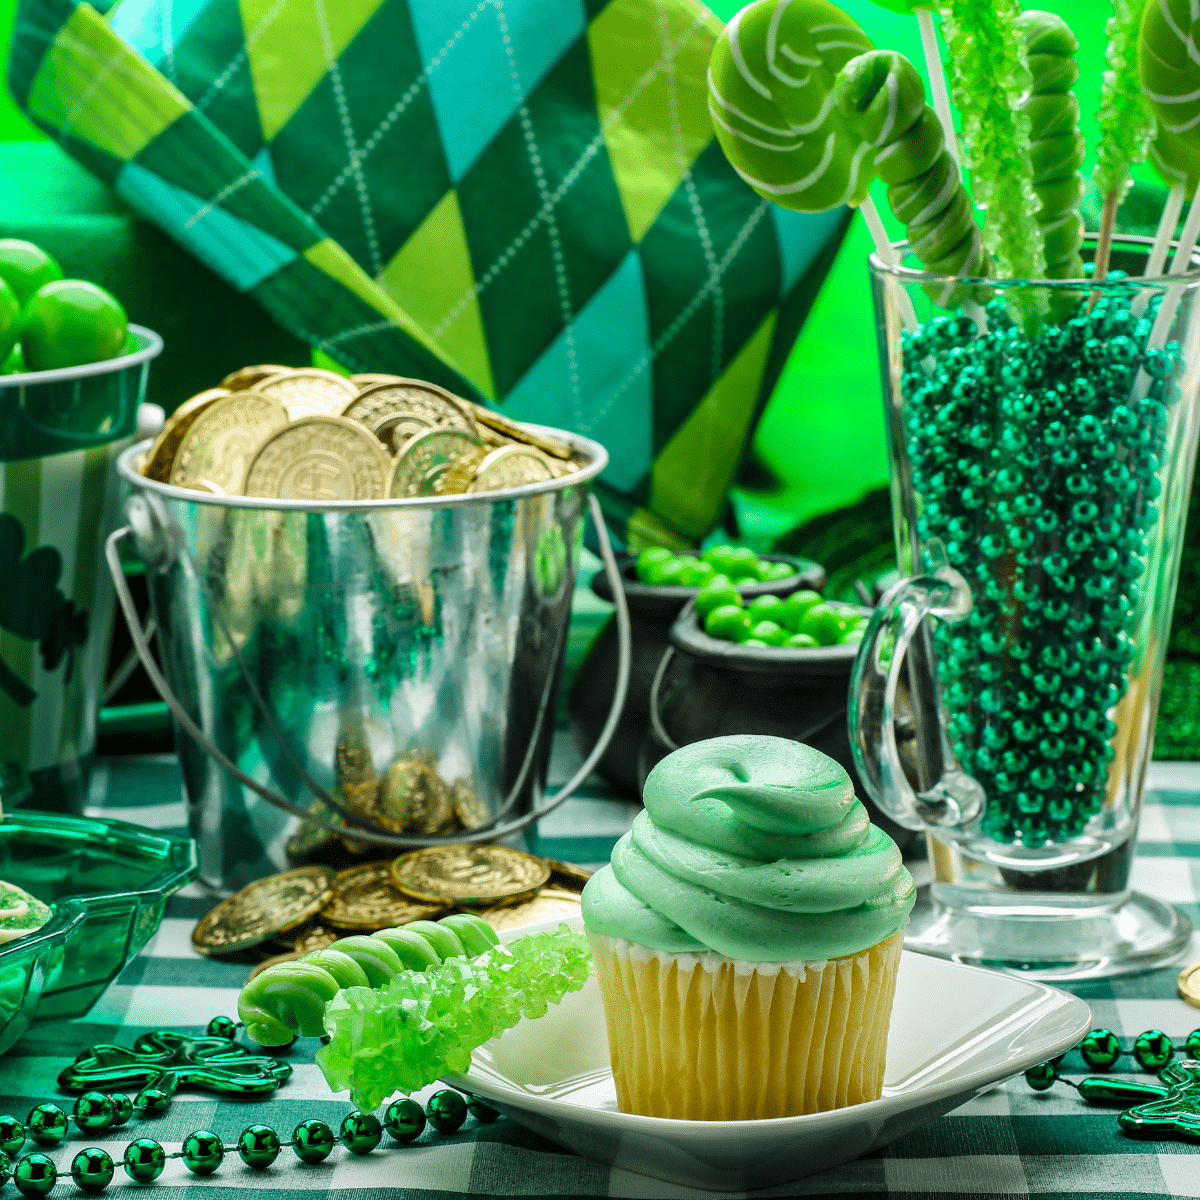 St Patrick's Day party table with green frosted cupcake, gold coins in a silver bucket, green beads and green candy.